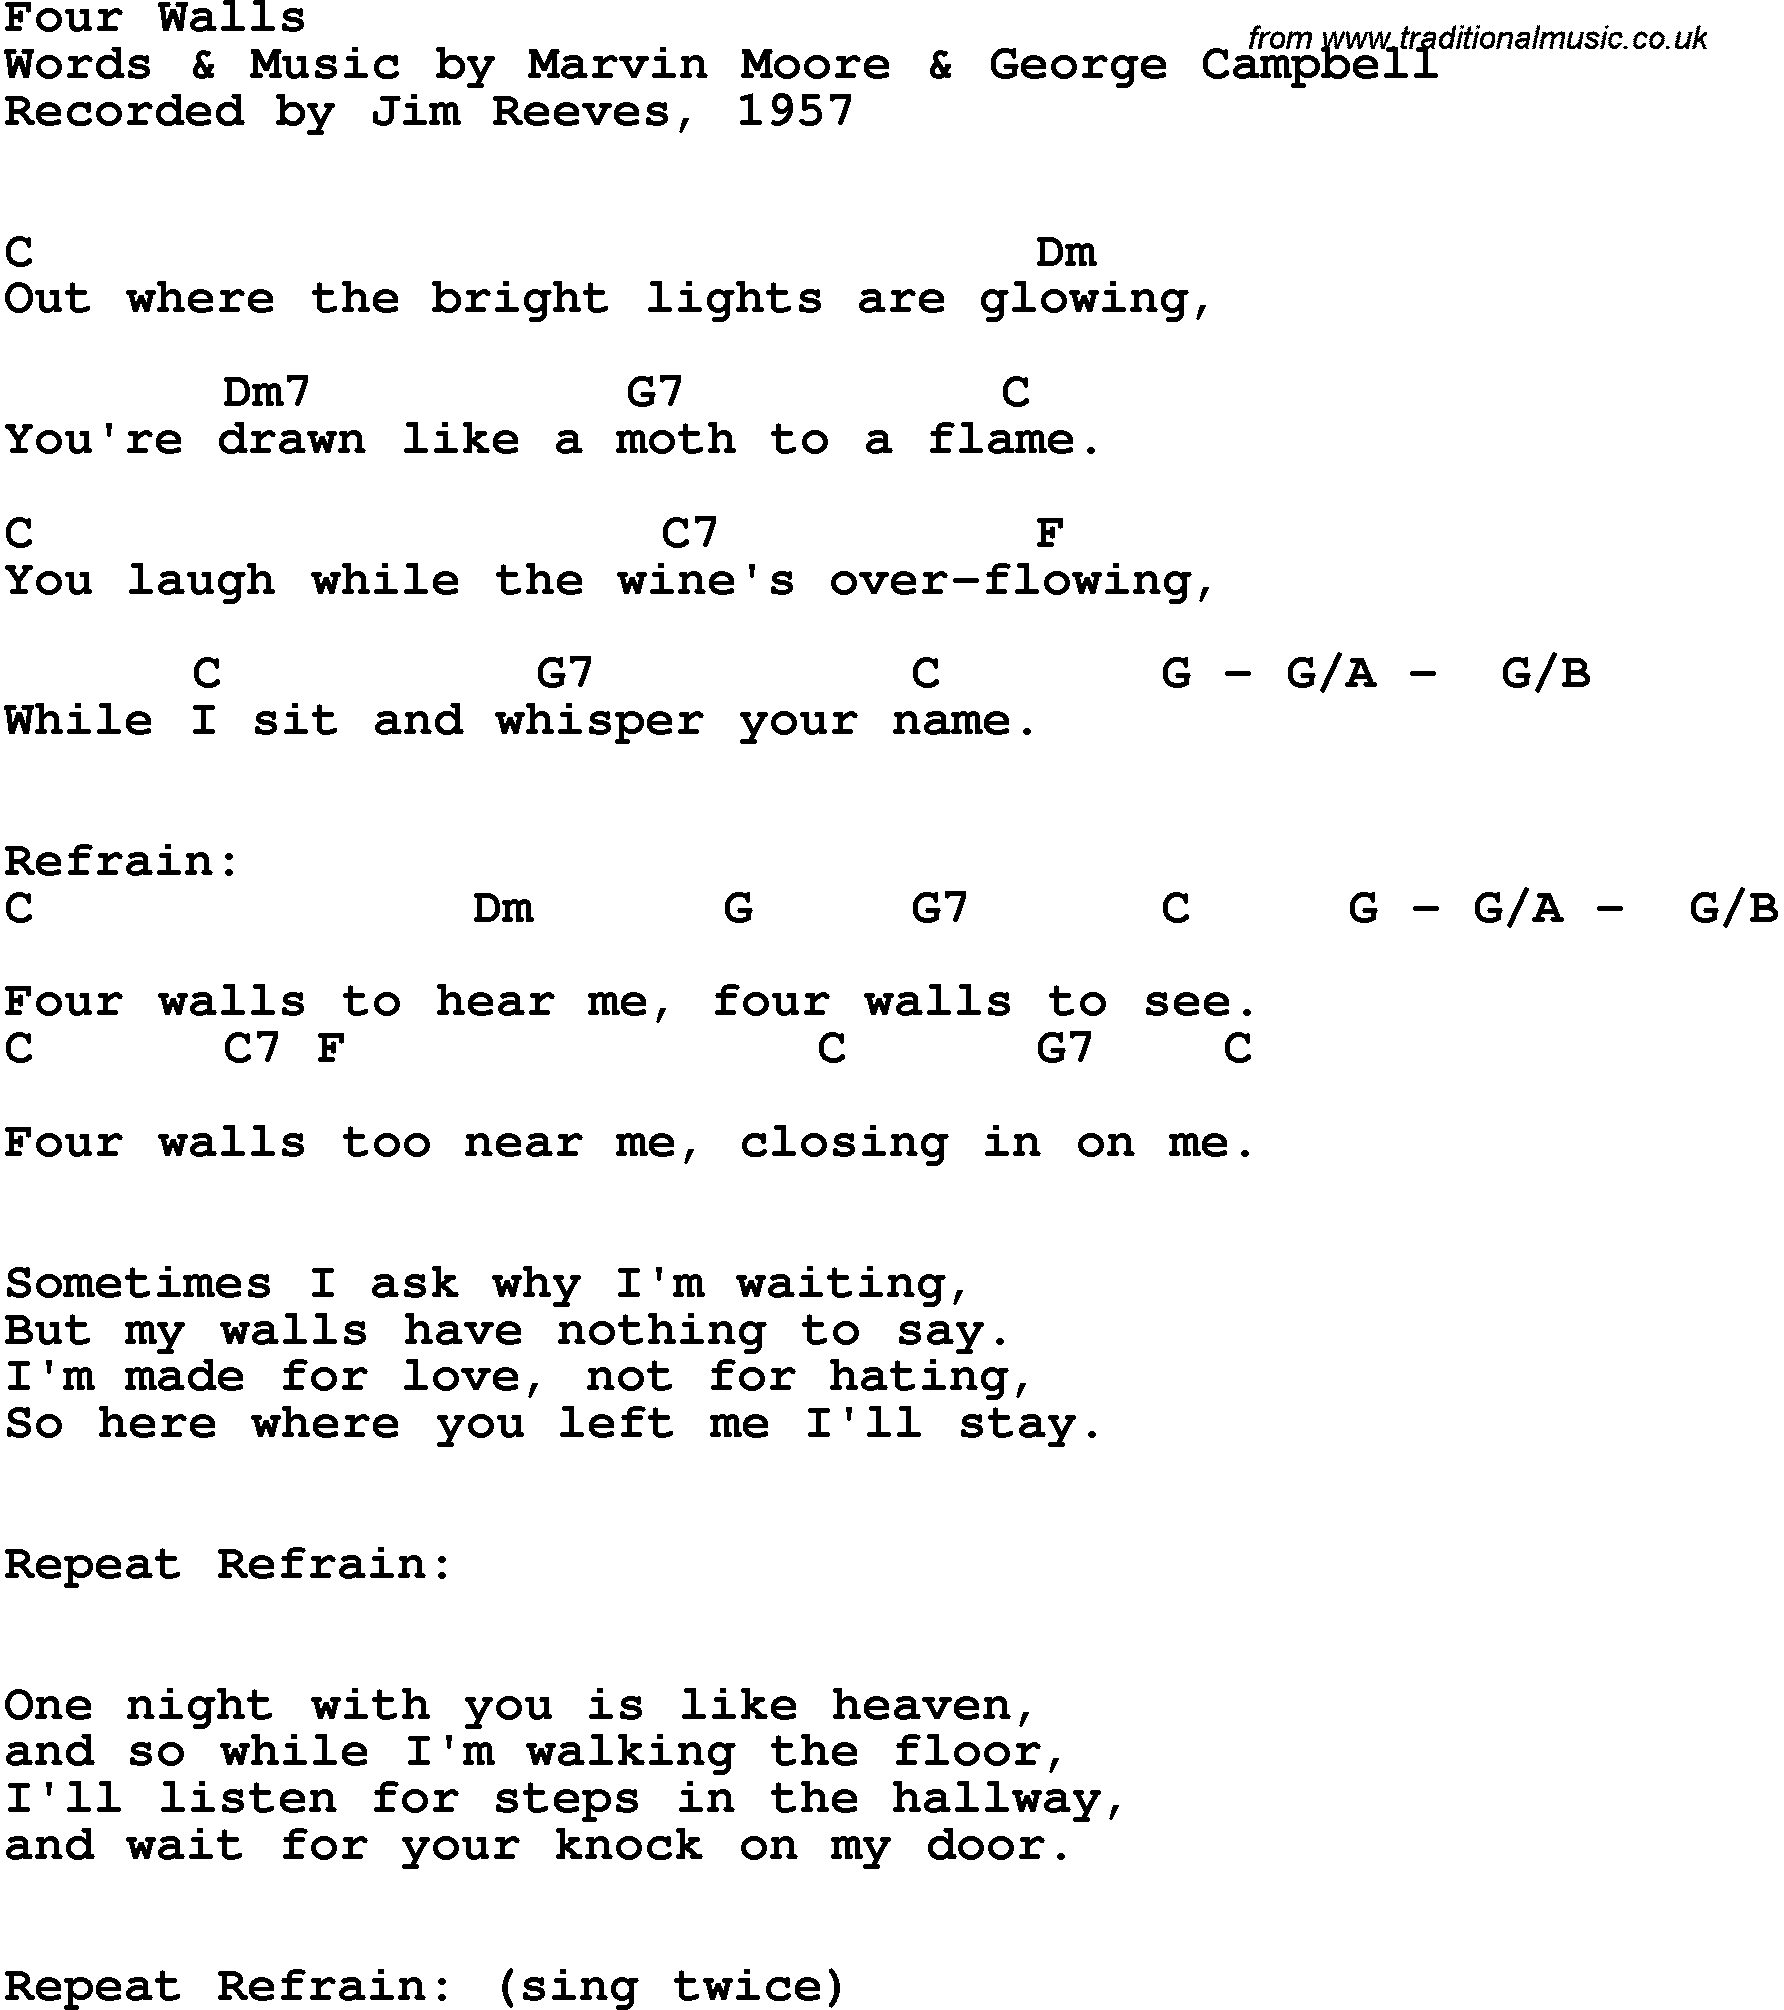 Song Lyrics with guitar chords for Four Walls - Jim Reeves, 1957